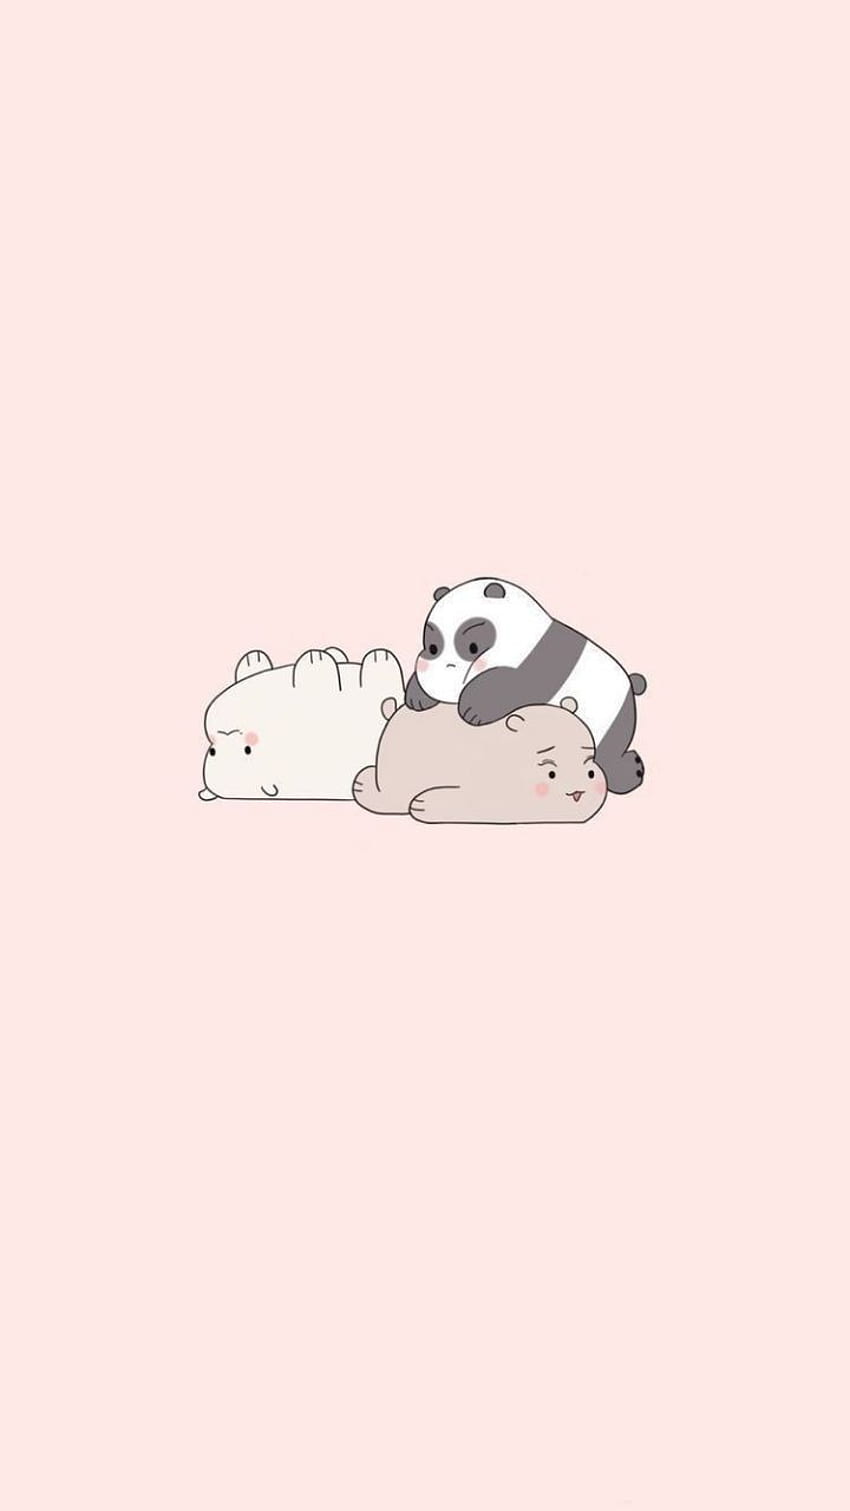 A panda and two cats laying on the ground - We Bare Bears